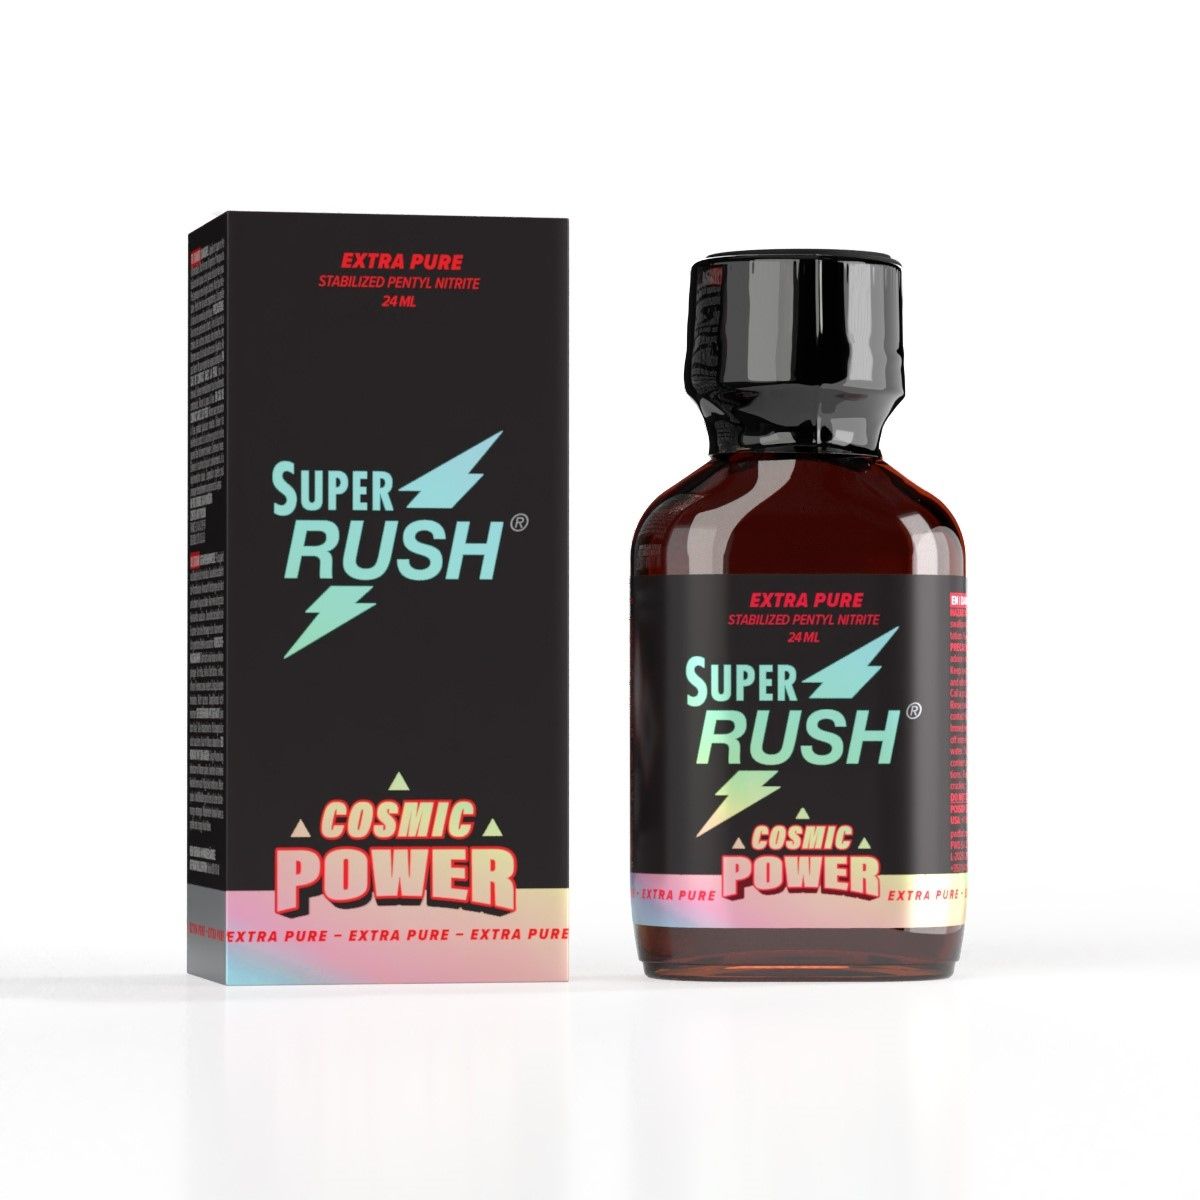 Bottle of "Super Rush Cosmic Power Pentyl" next to its packaging, emphasizing its "extra pure" quality.